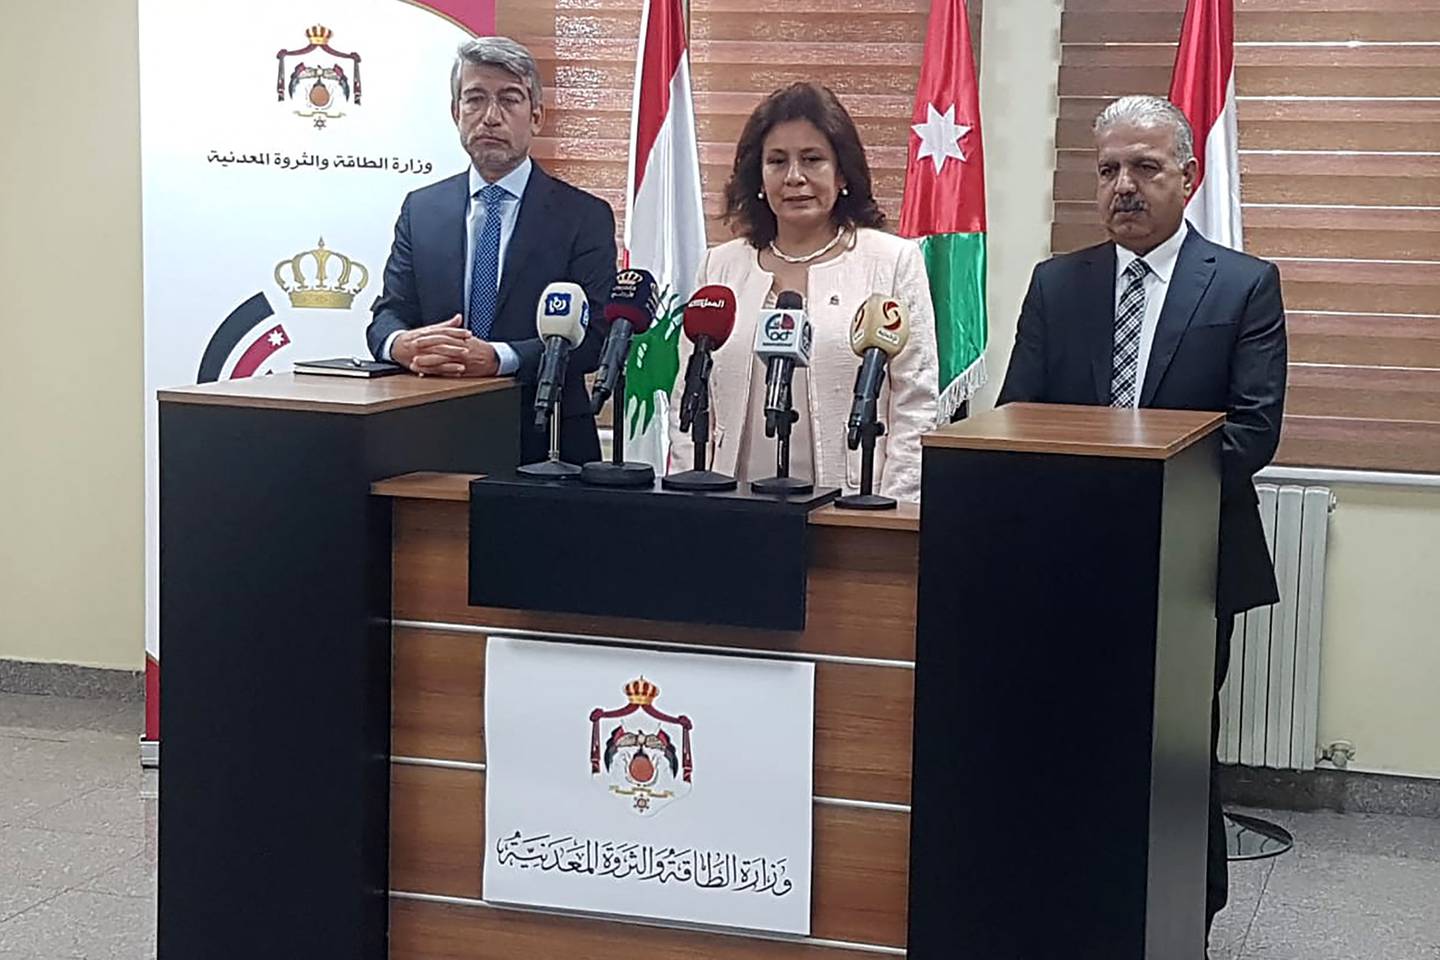 Lebanon's Minister of Energy and Water Walid Fayad, Jordan's Minister of Energy and Mineral Resources Hala Zawati, and Syria's Minister of Oil and Mineral Resources Bassam Tohme. AFP